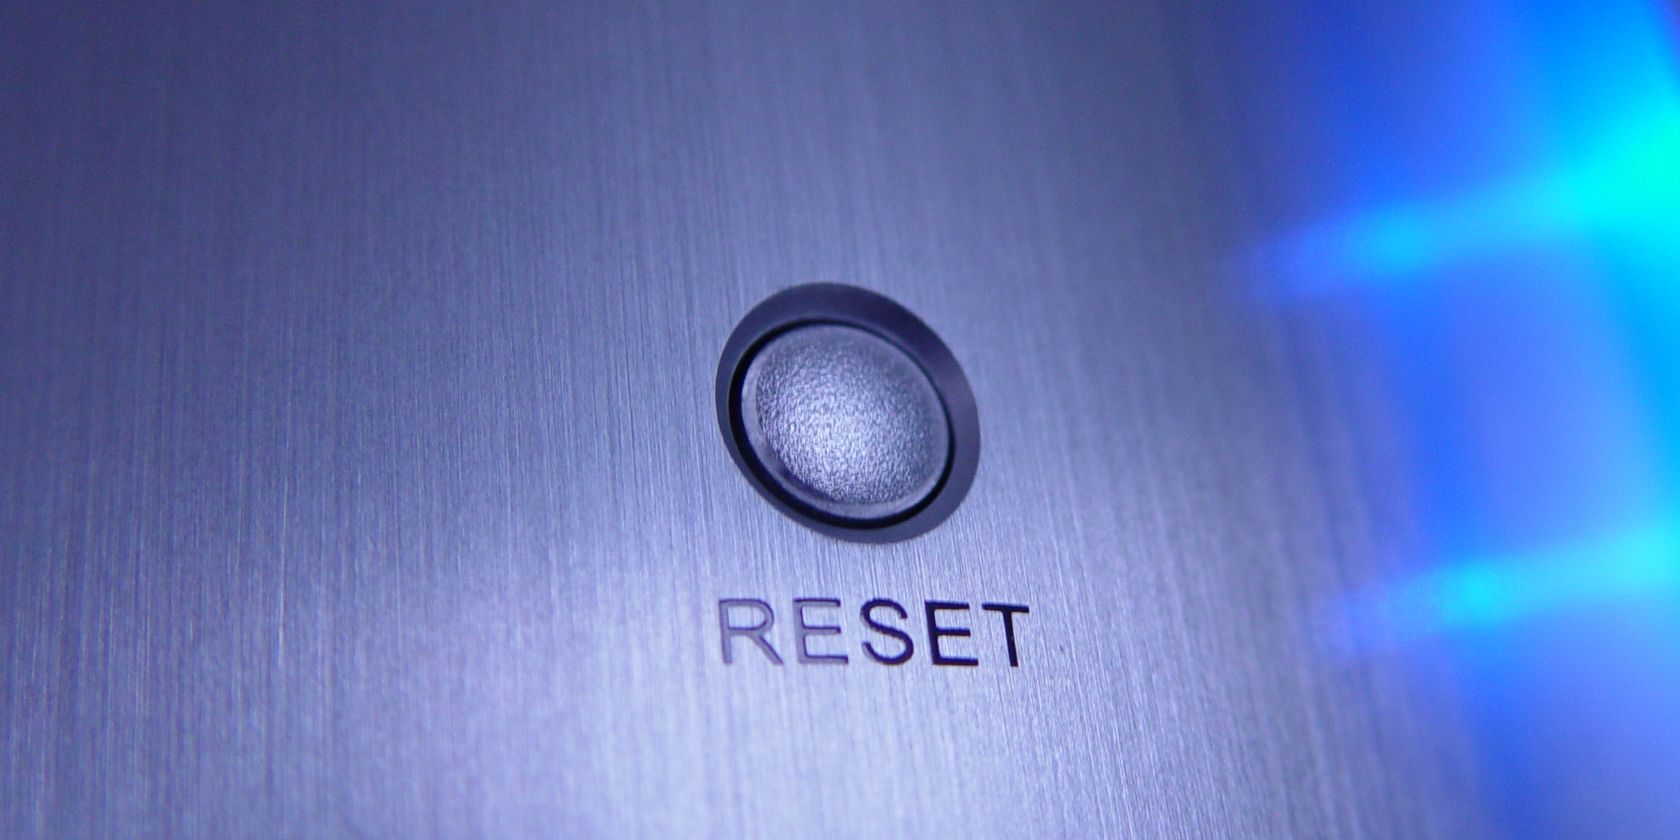 Reset button on computer